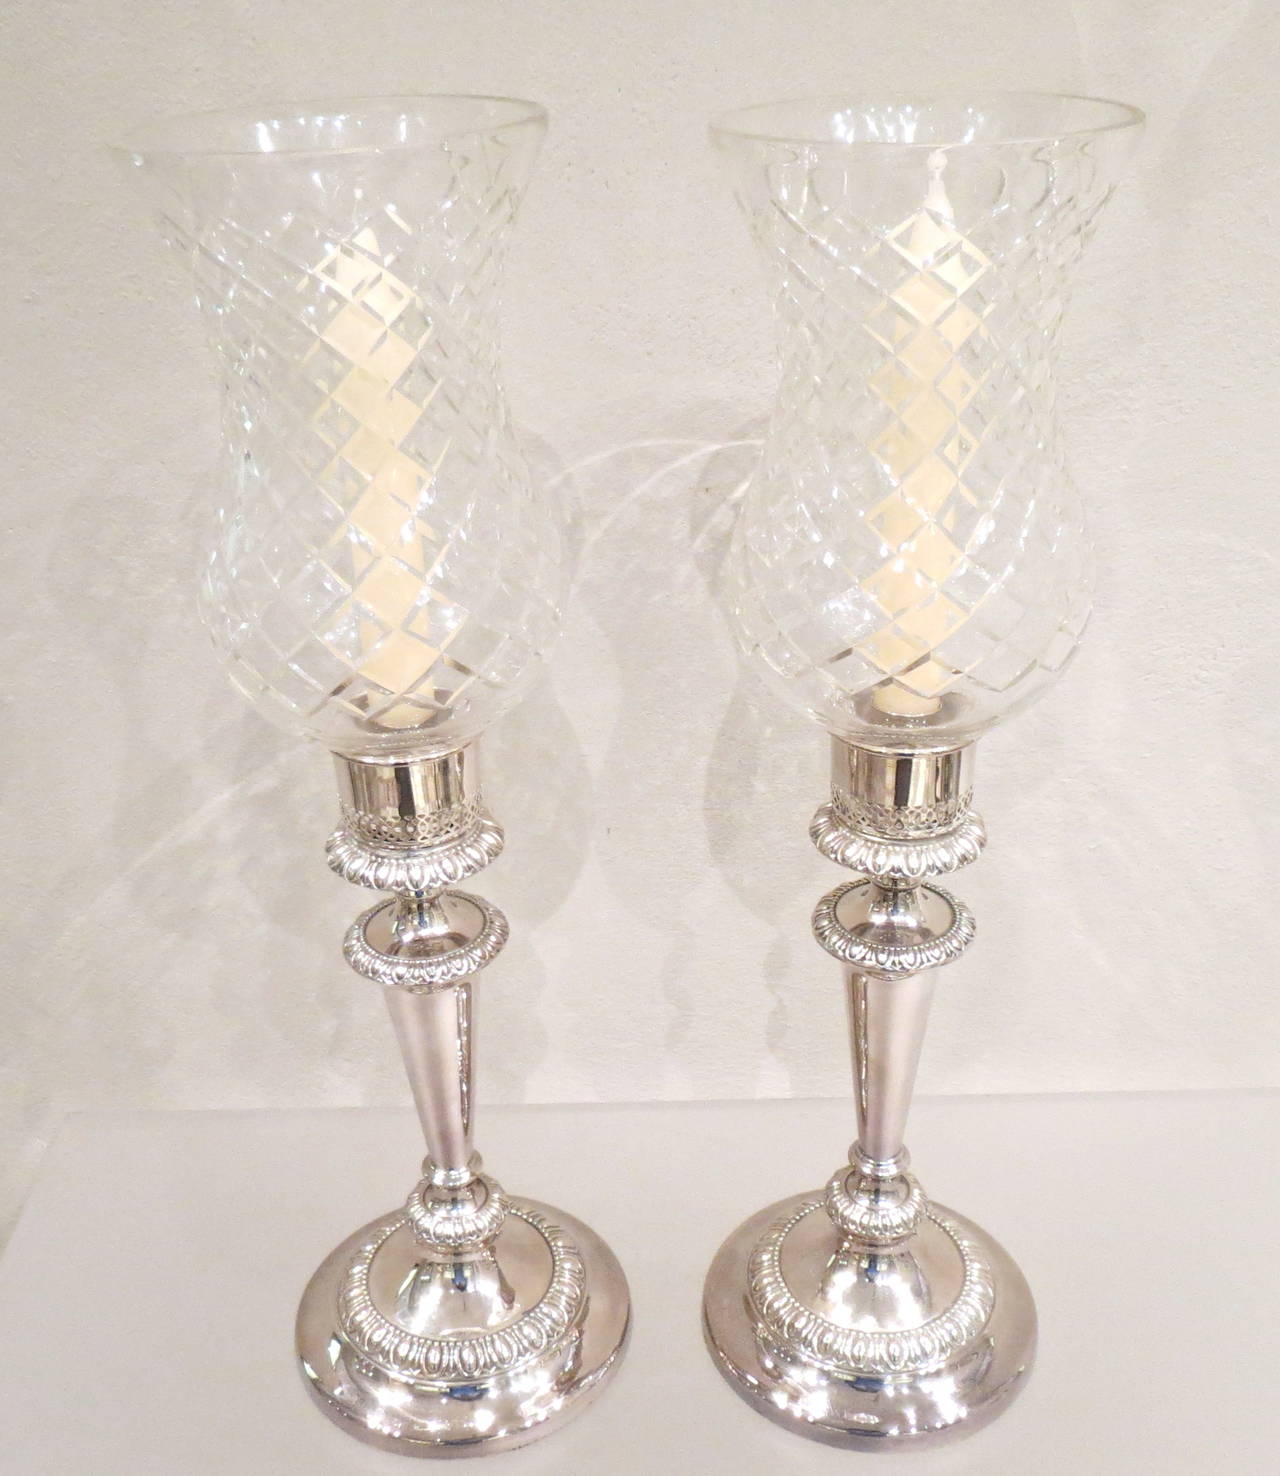 Sheffield plate pair of candlesticks with cut-glass storm shades, England, 1820-1830.